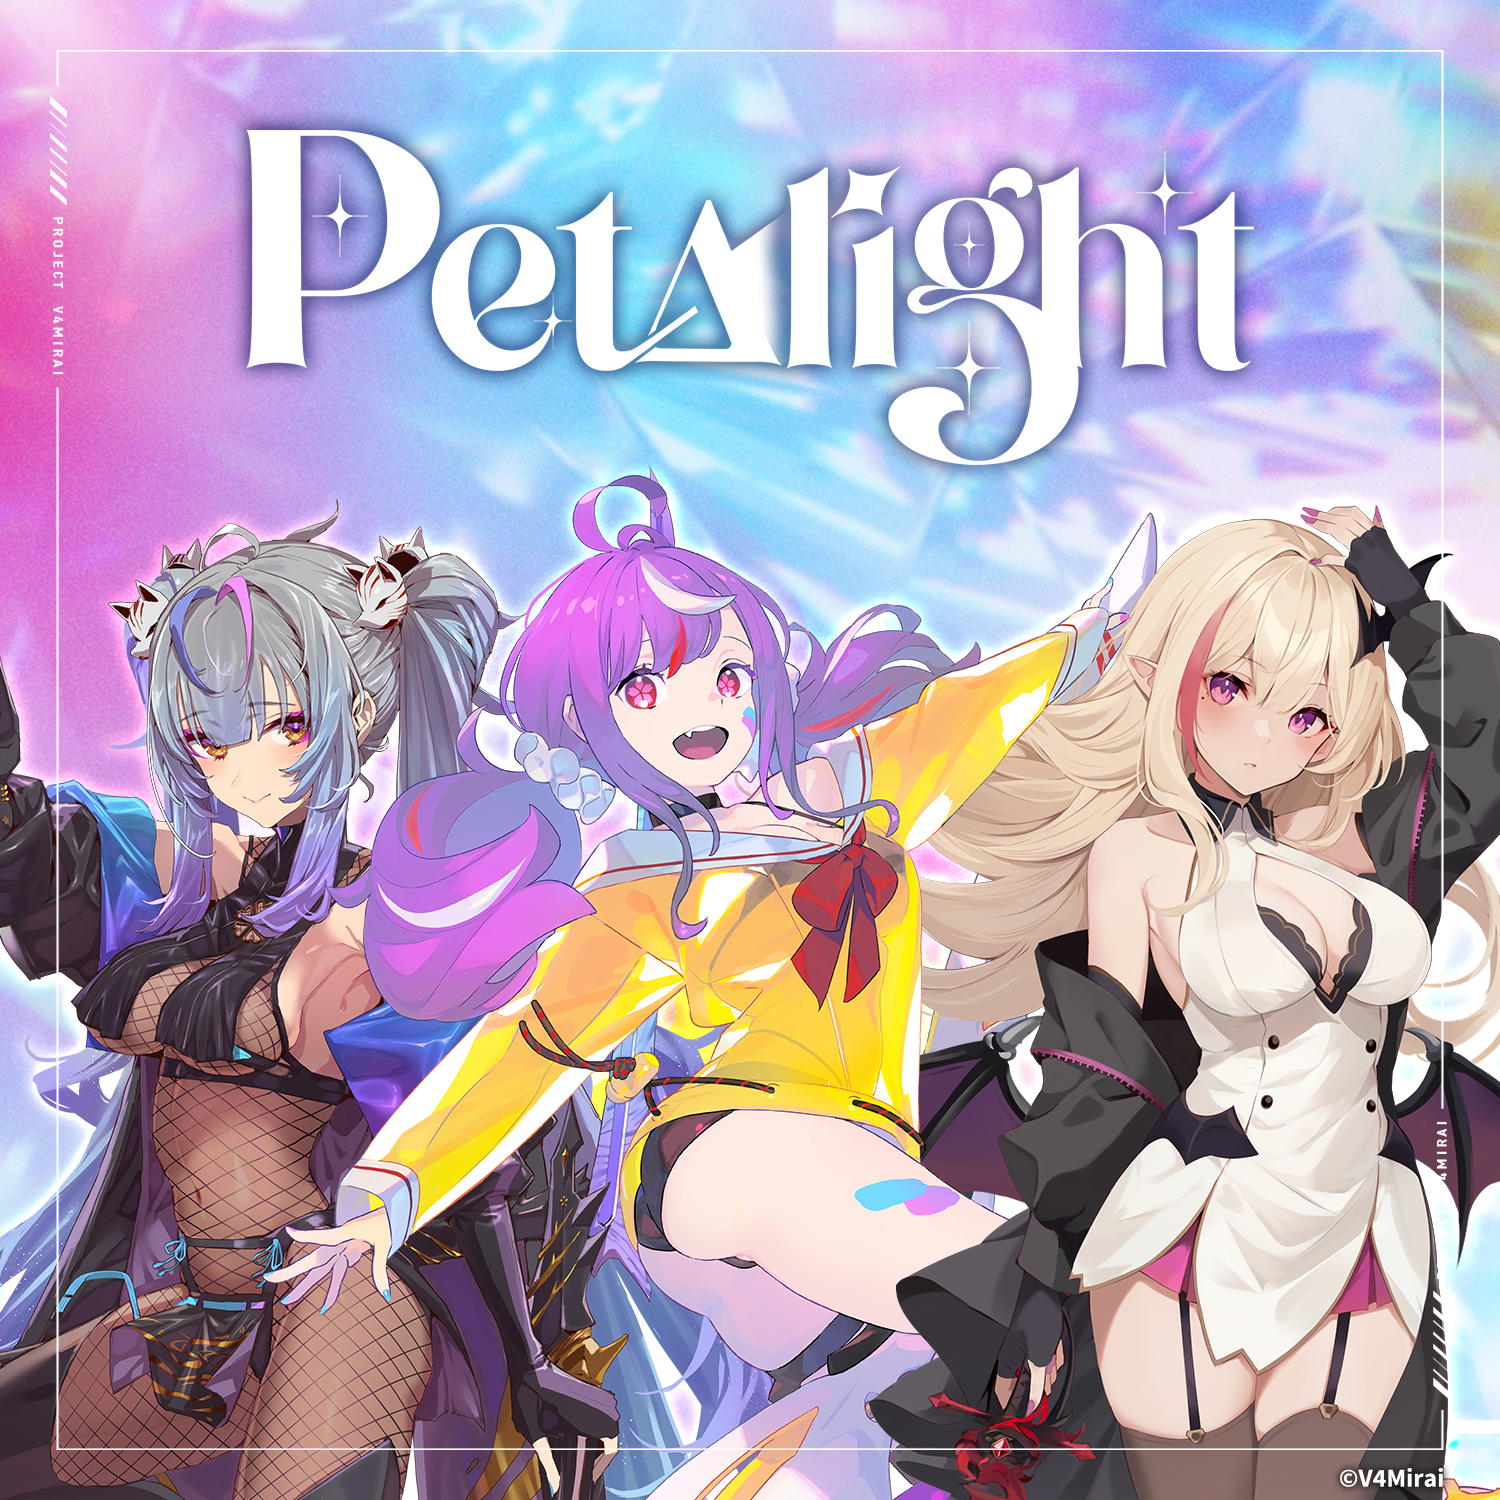 Petalight Welcome Voice Experience